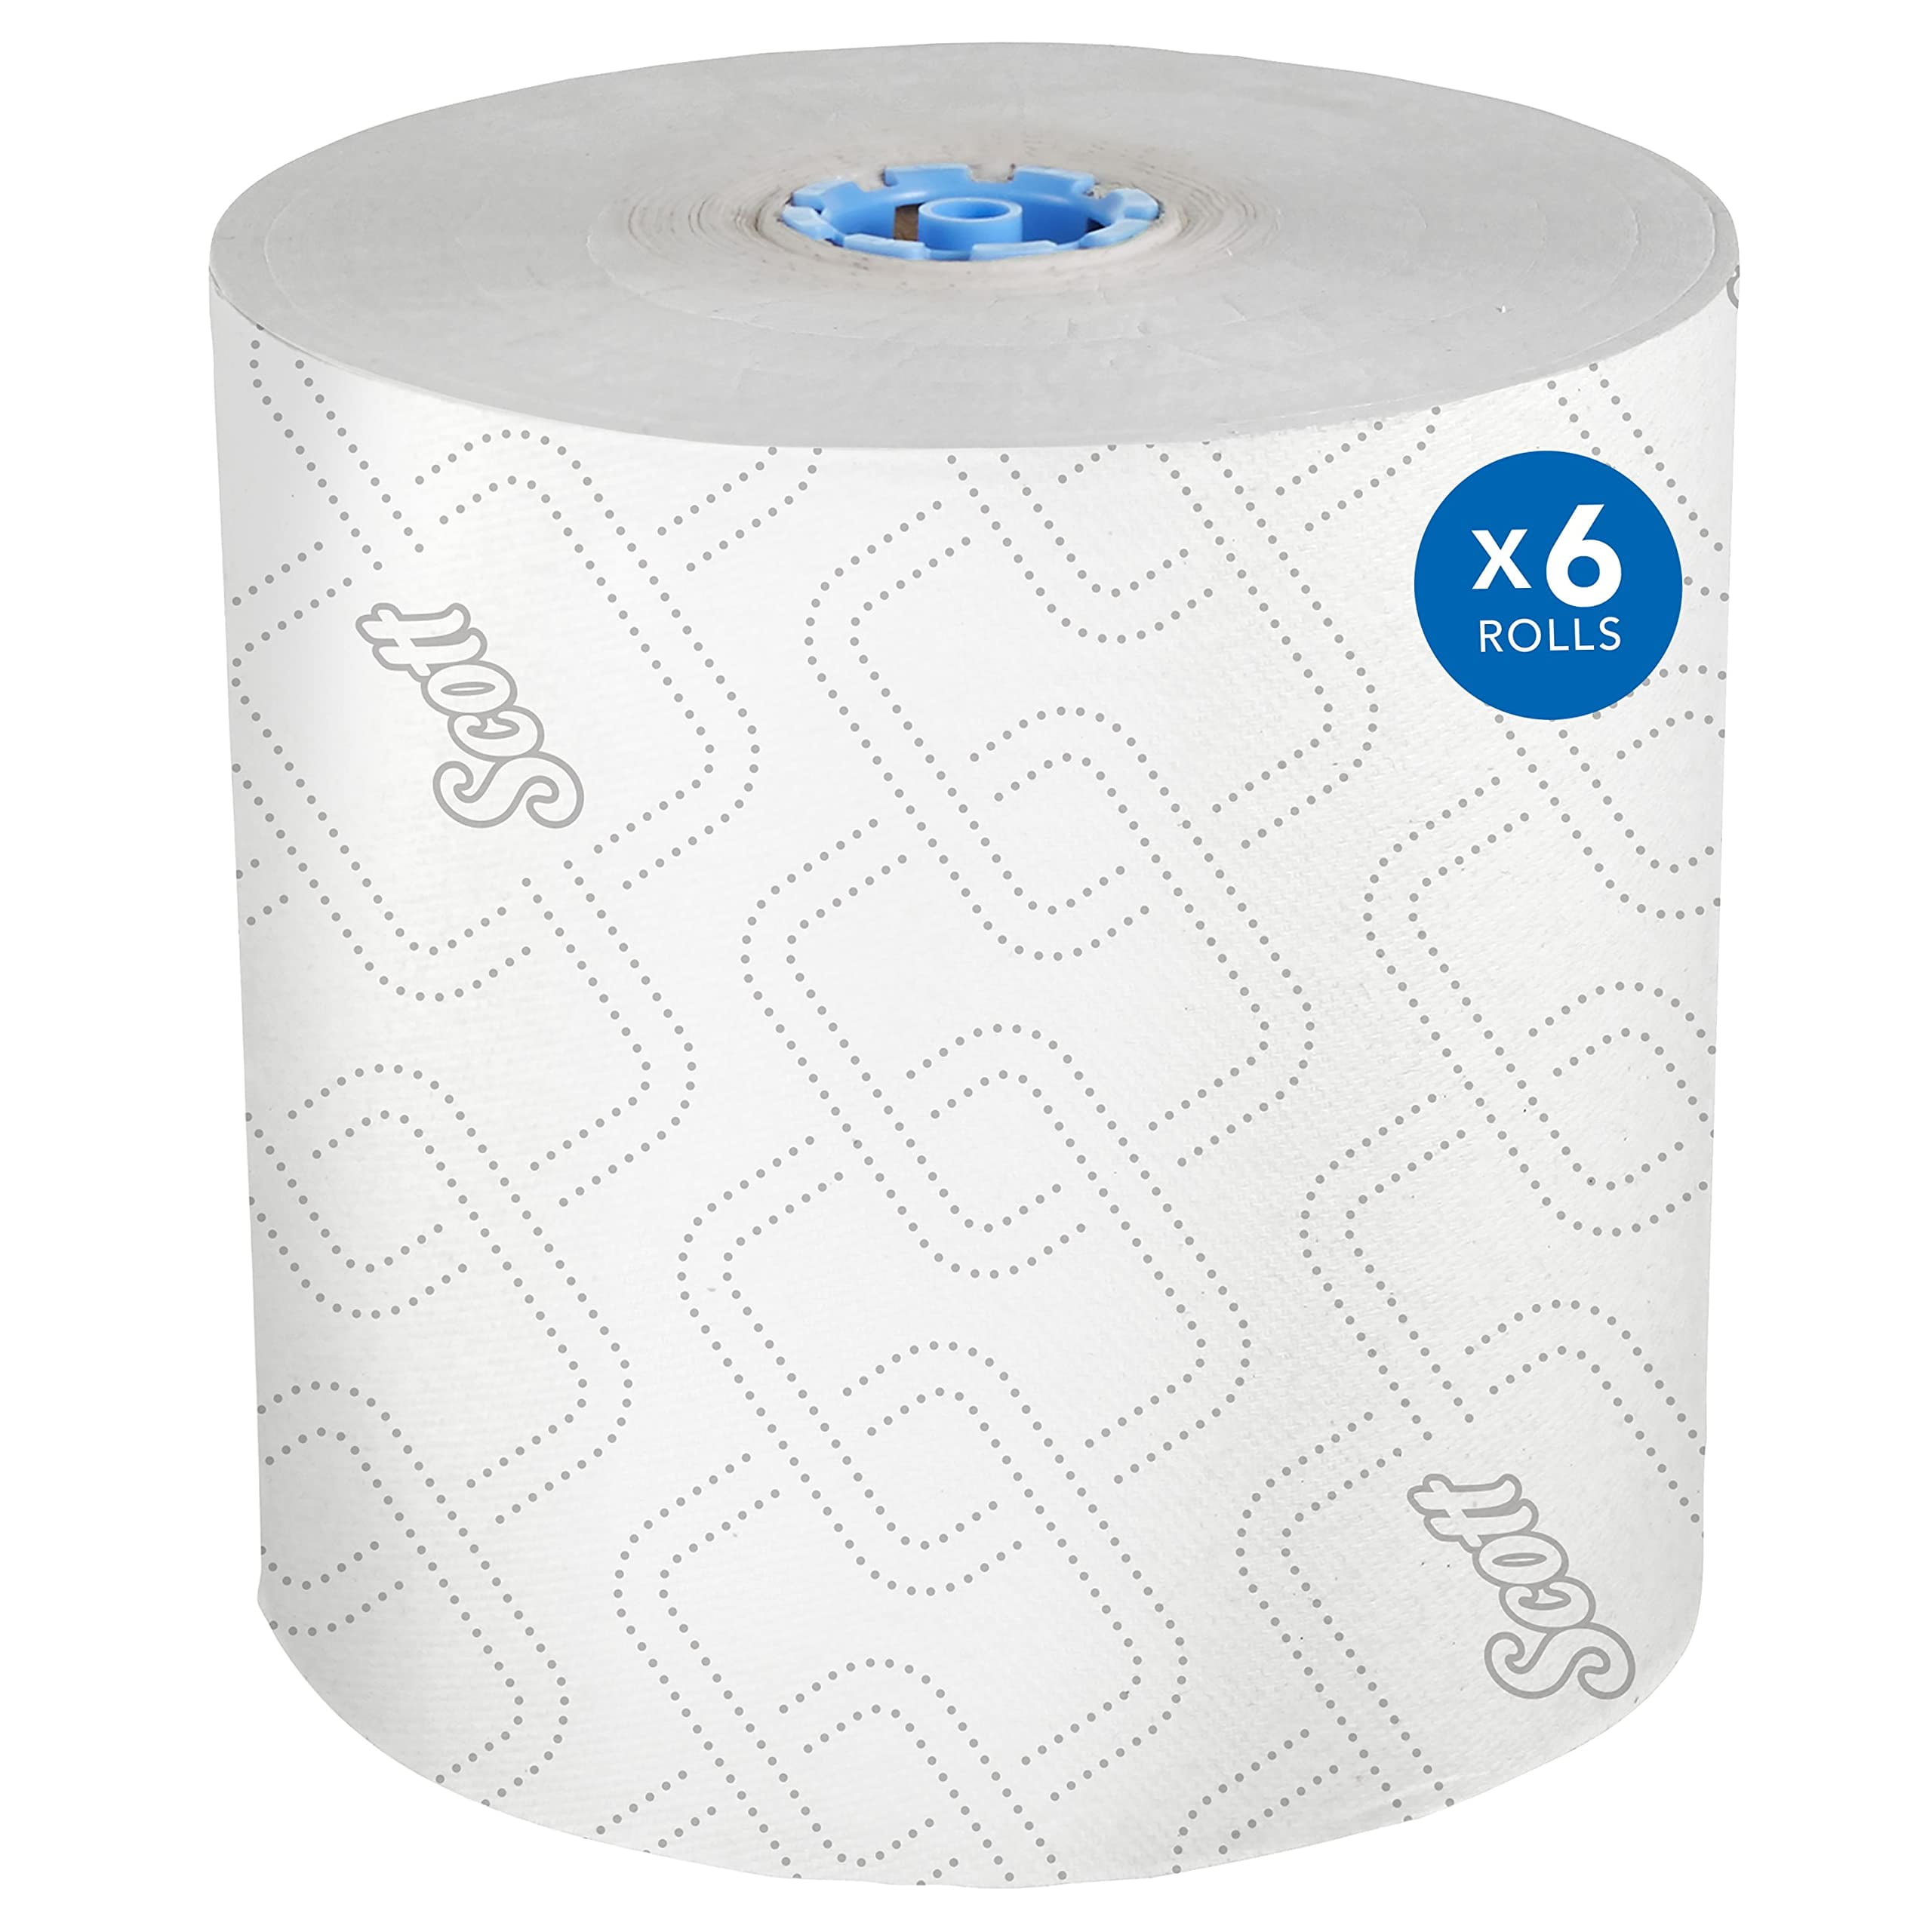 Scott Pro High-Capacity Hard Roll Towels (25702), With Elevated Design And  Absorbency Pockets, For Blue Core Dispensers, White, (1,150,/Roll, 6 